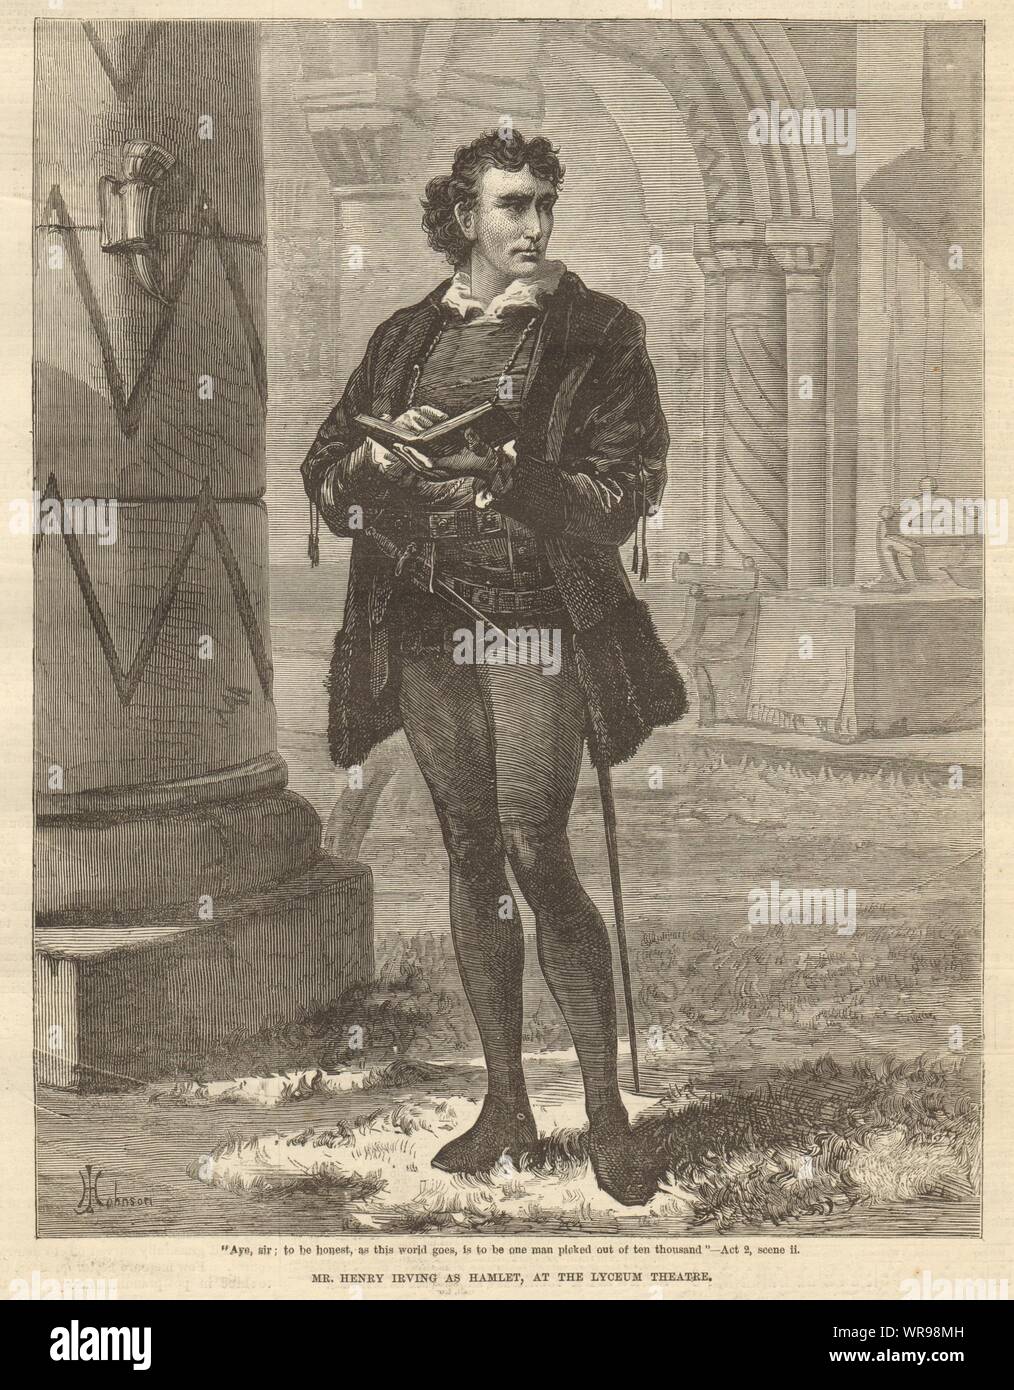 Mr. Henry Irving as Hamlet, at the Lyceum Theatre. London. Shakespeare 1874 Stock Photo